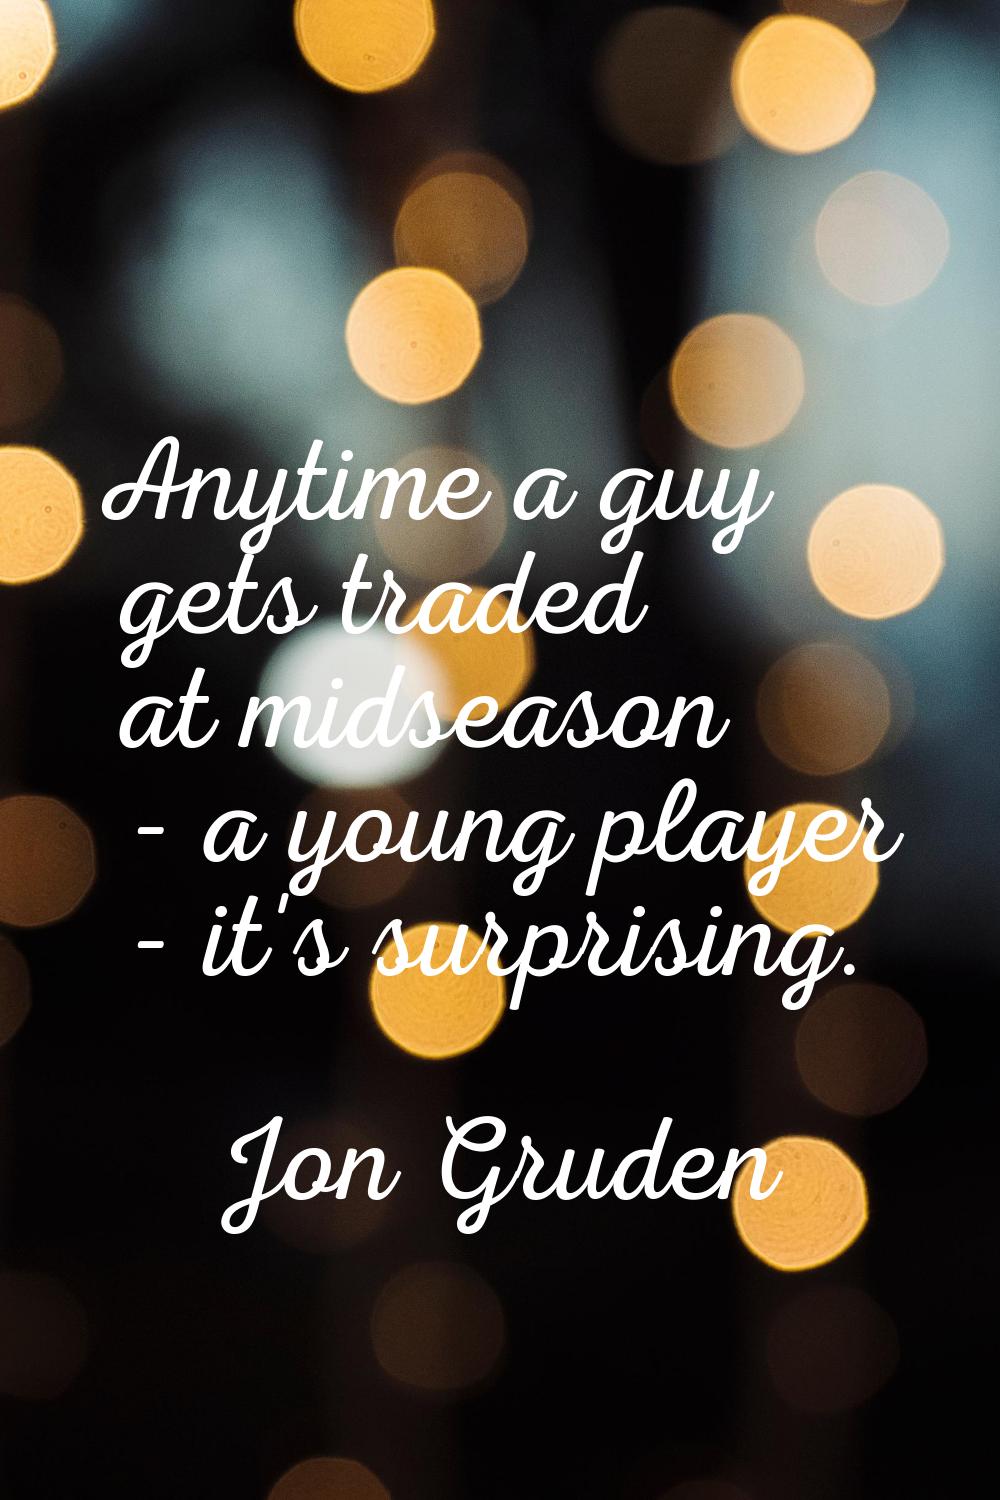 Anytime a guy gets traded at midseason - a young player - it's surprising.